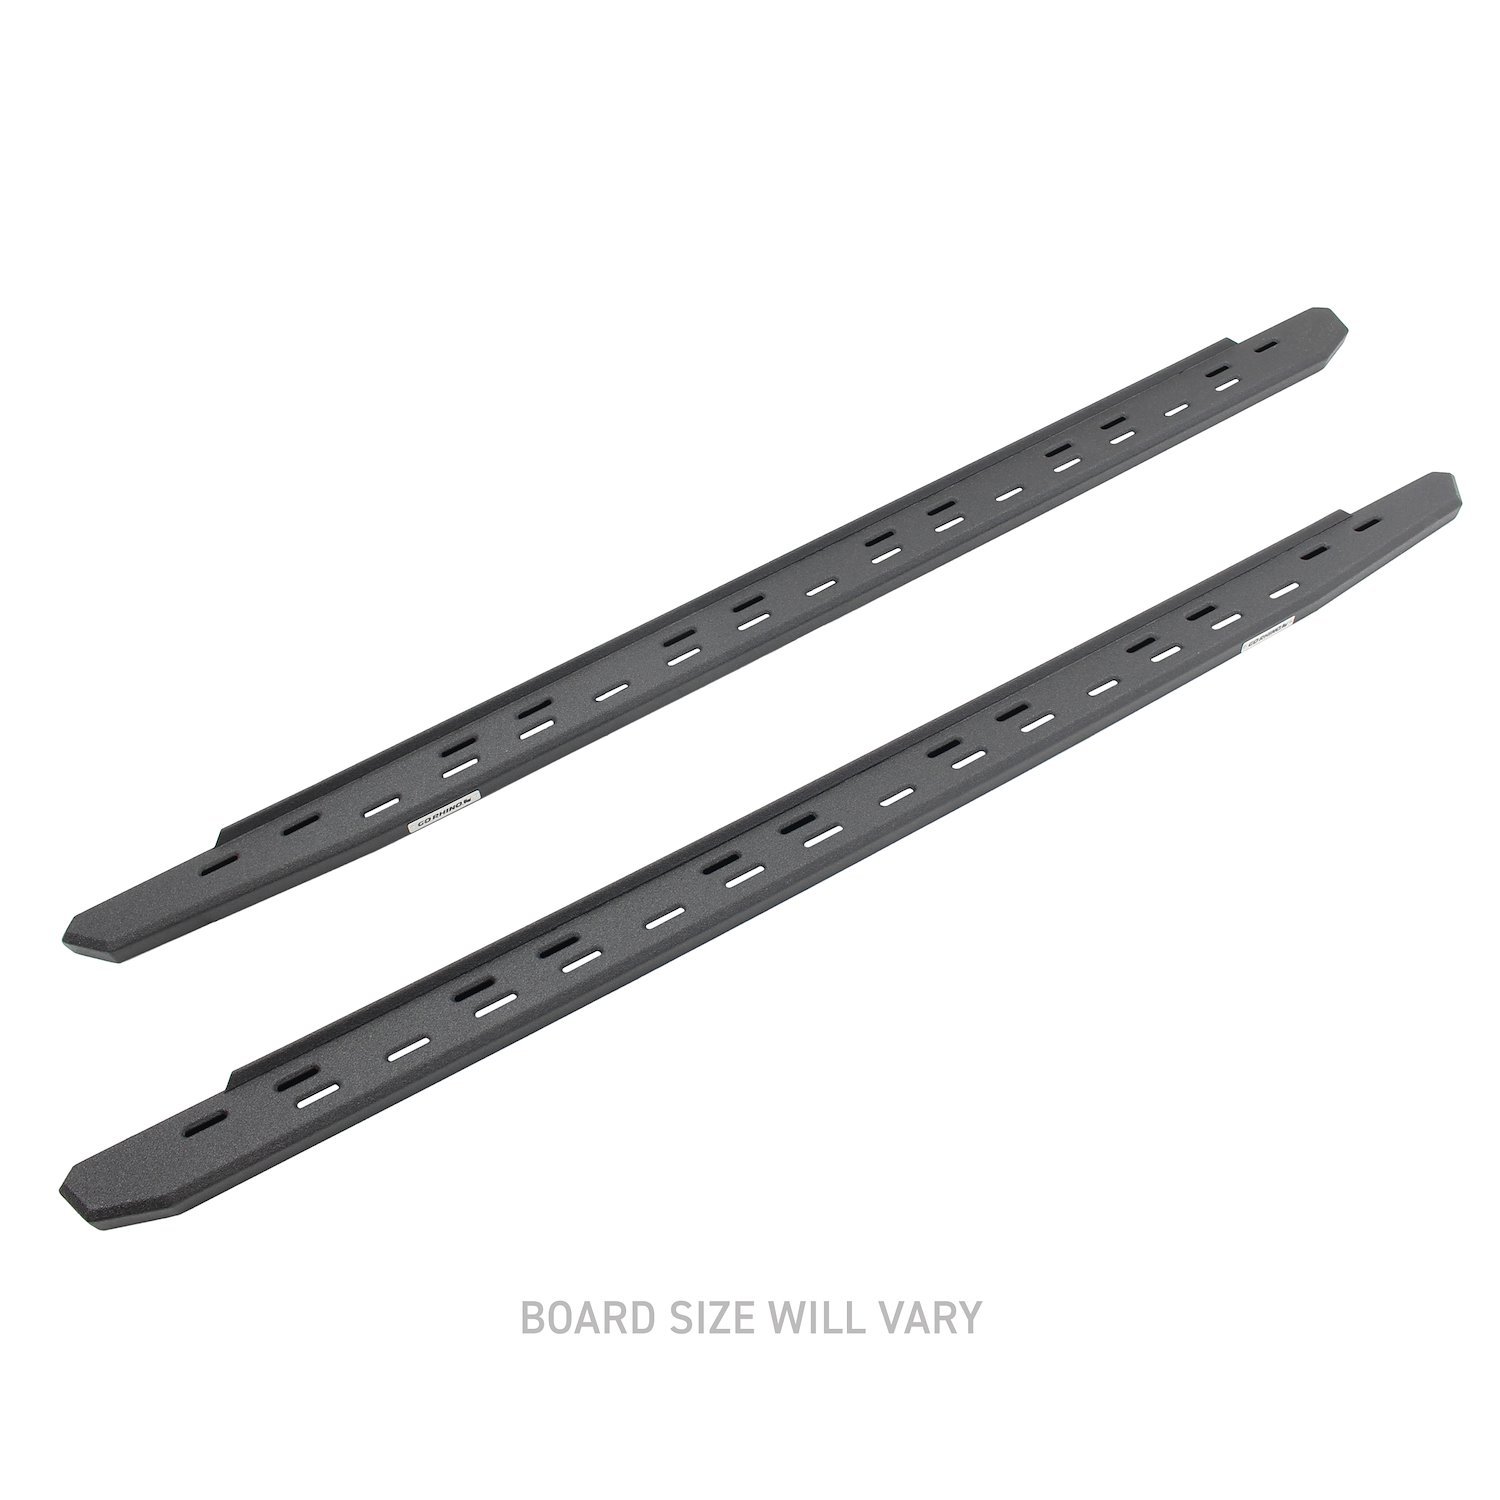 RB30 Slim Line Running Boards w/Bracket Kit Fits Select Chevy Colorado, GMC Canyon Crew Cab [Bedliner-Coated]